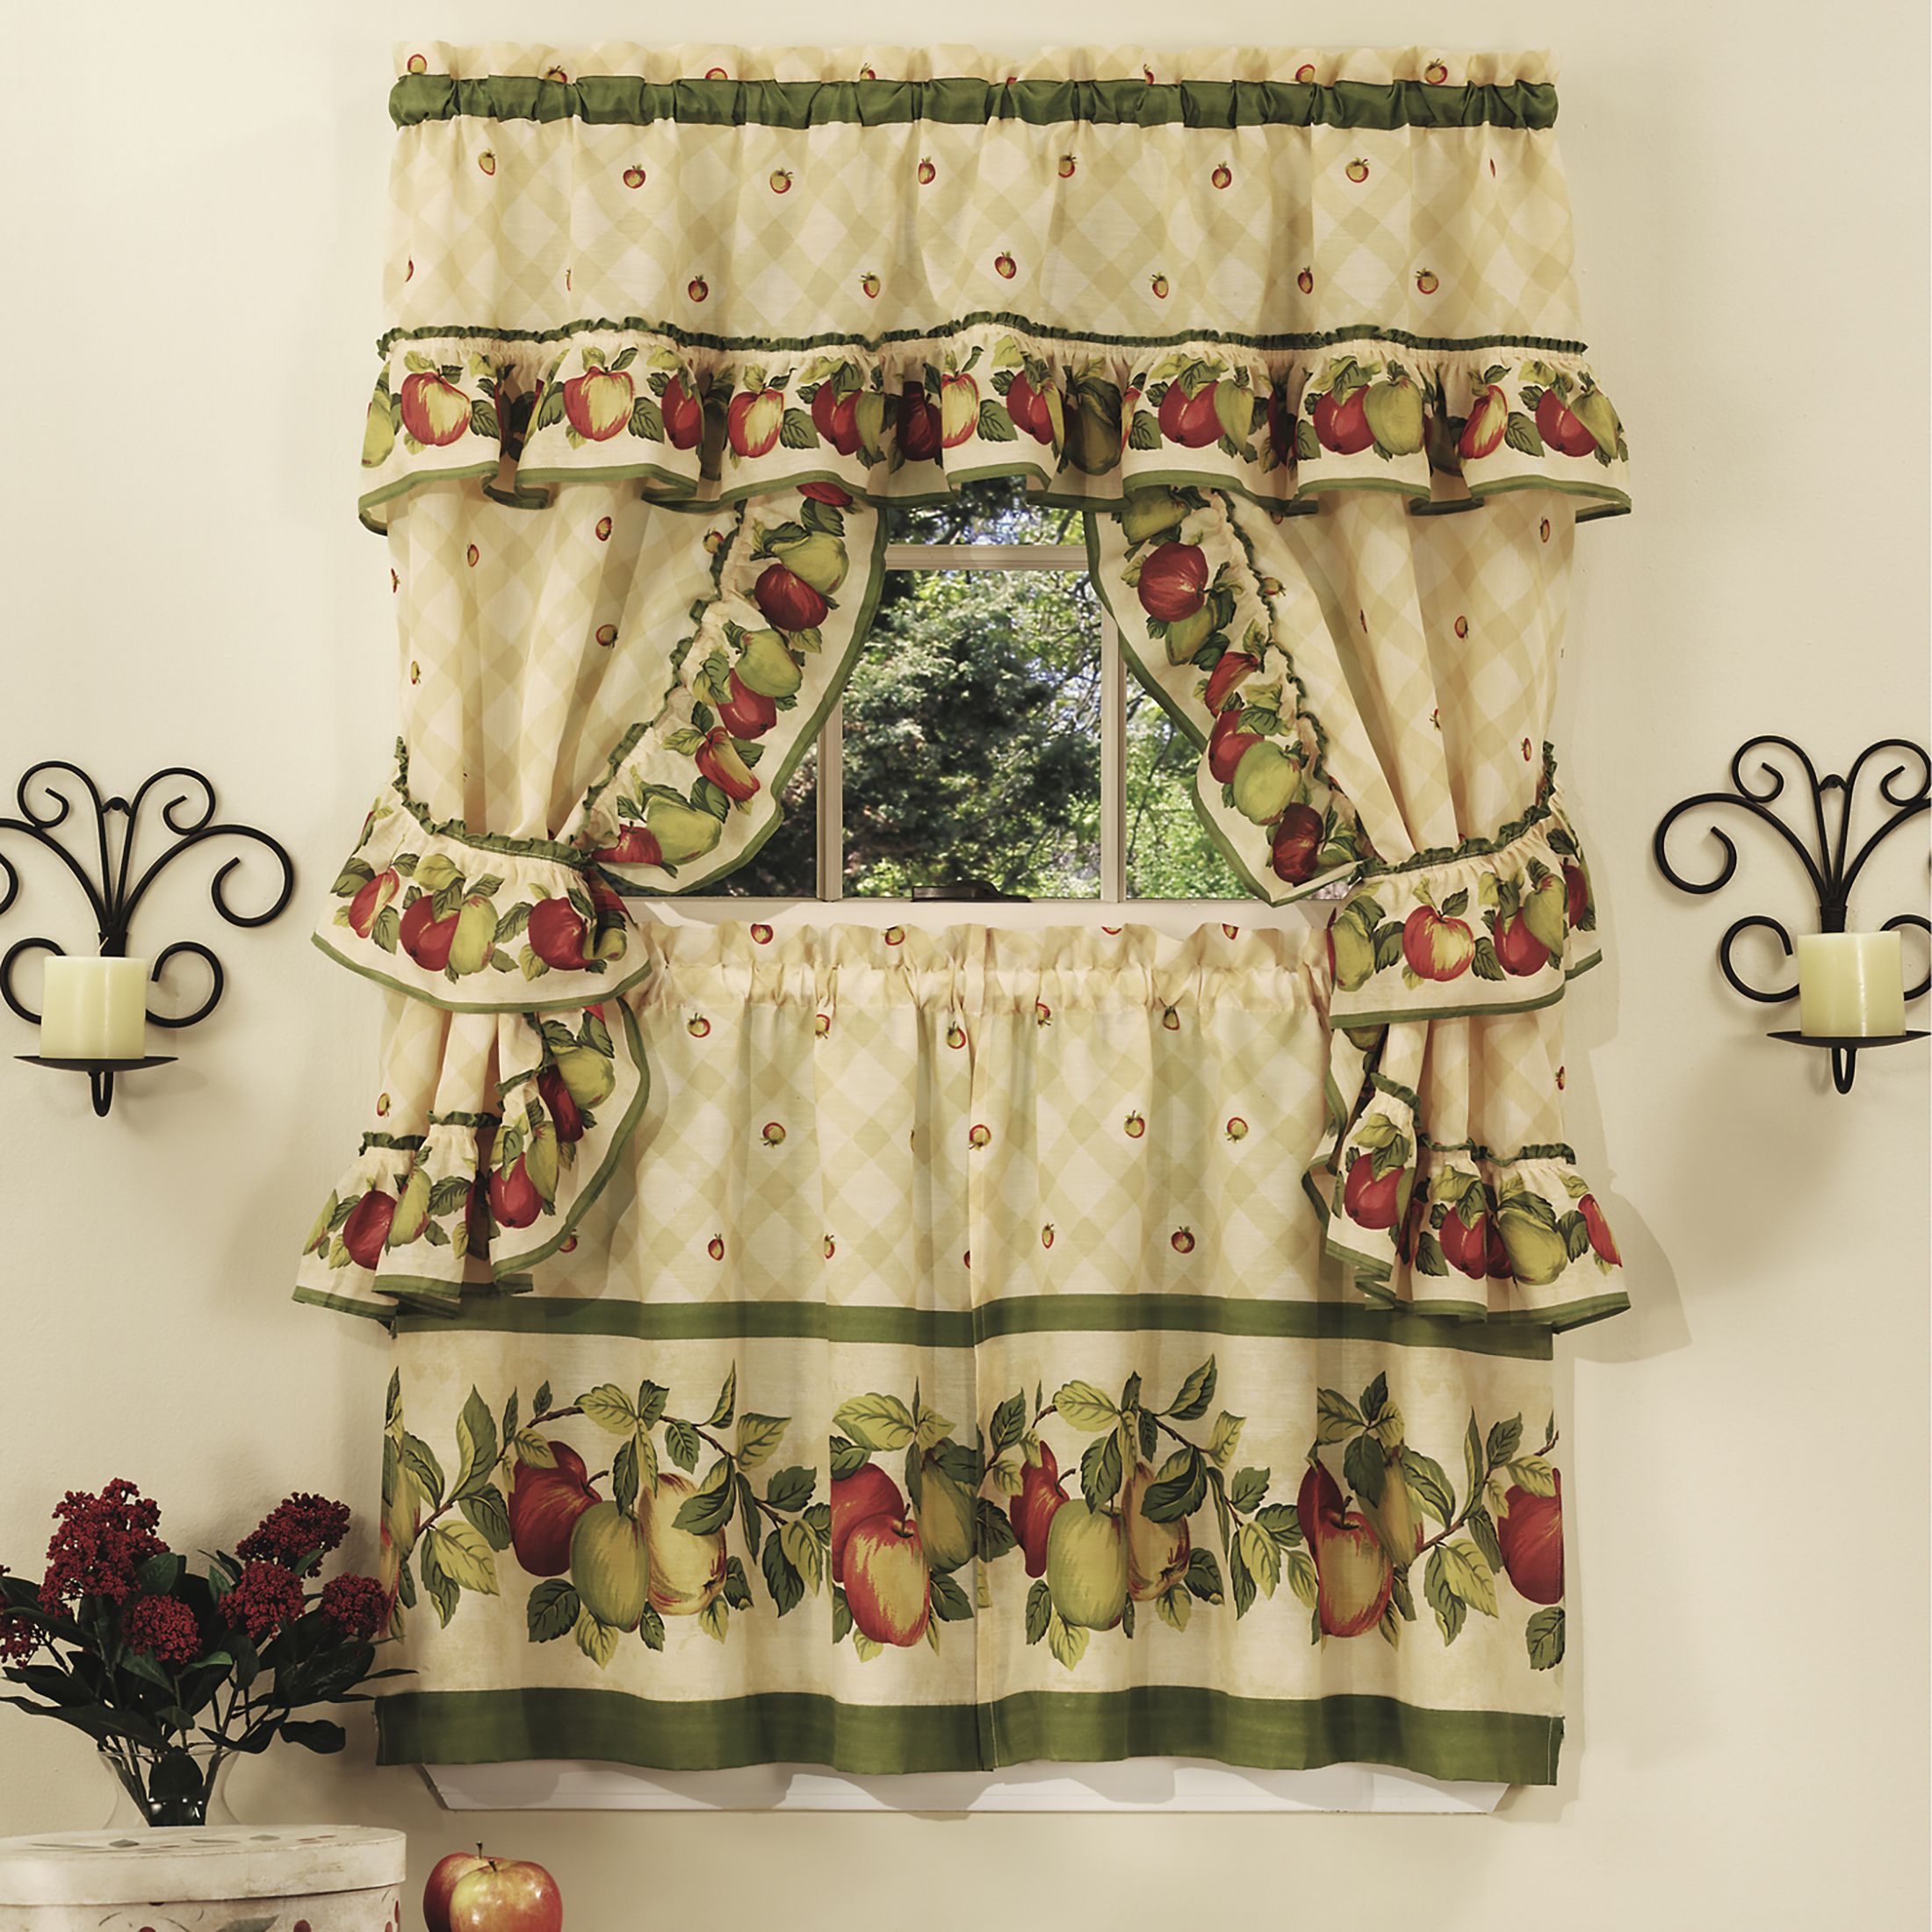 Details About 5pc Window Kitchen Curtain Cottage Set, Apple Vines, Tiers,  Valance, Tiebacks Pertaining To Delicious Apples Kitchen Curtain Tier And Valance Sets (View 2 of 20)